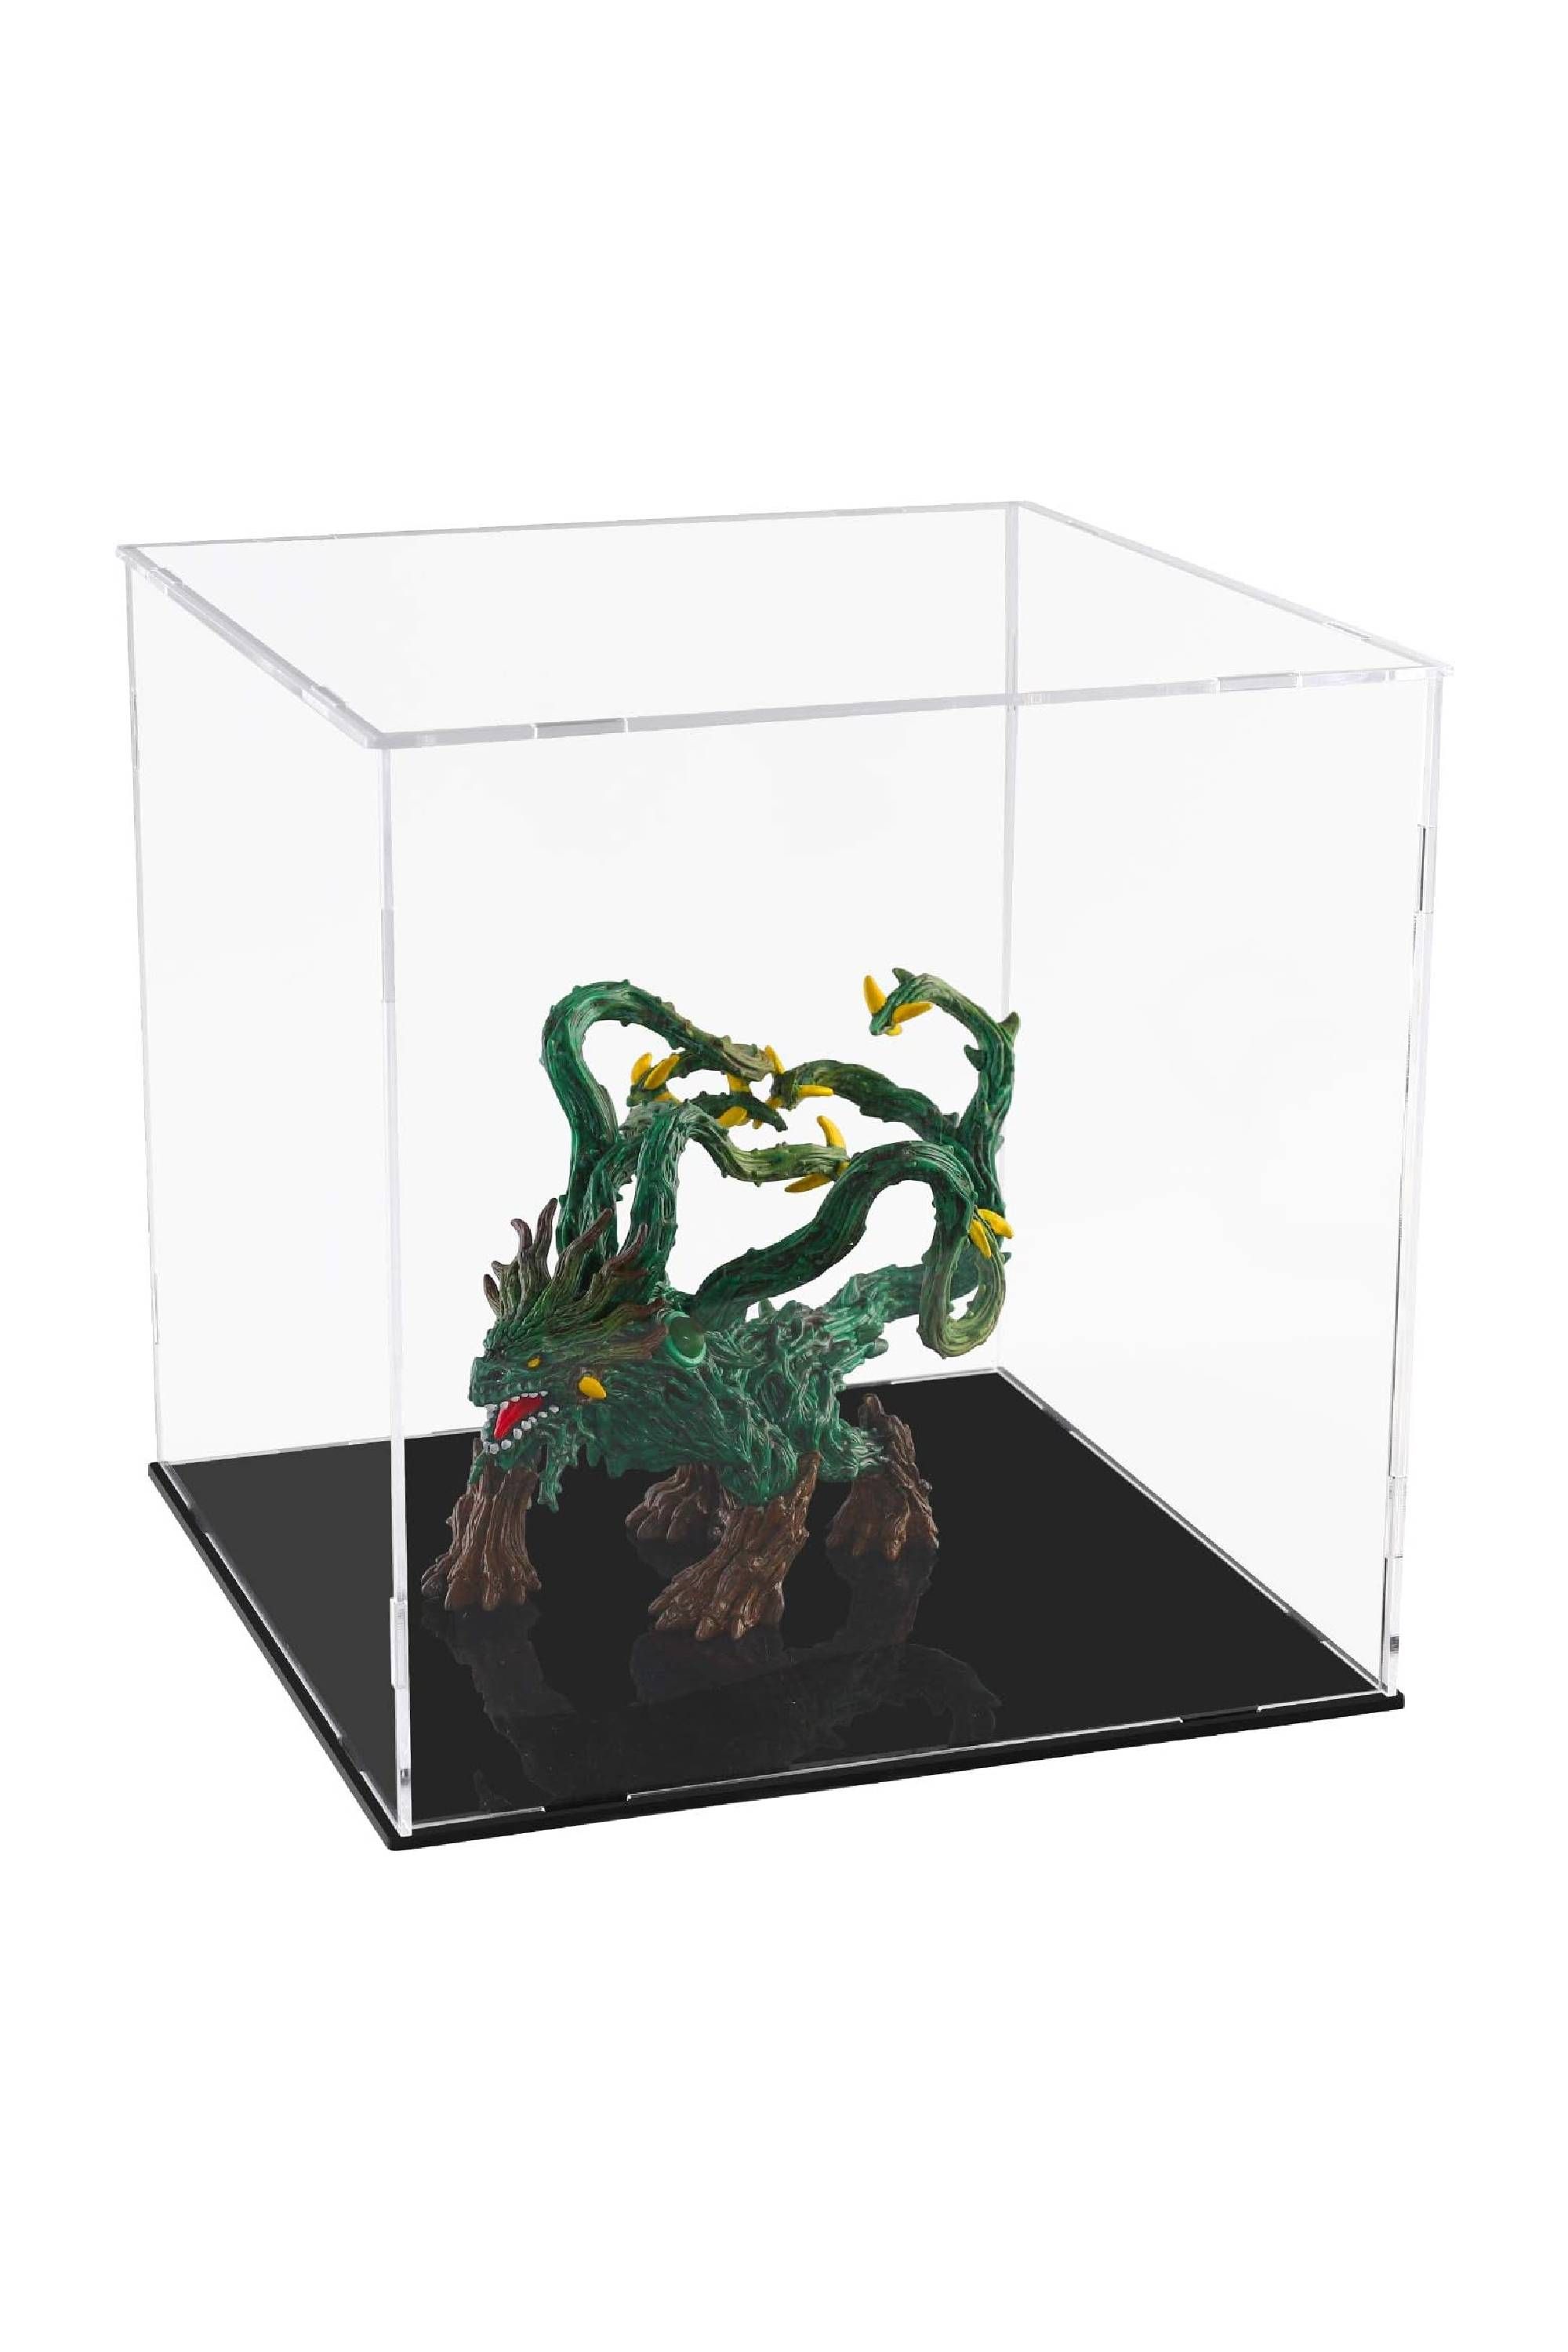 The Acrylic Display Case Protects Collectibles, Valuables, & Products!